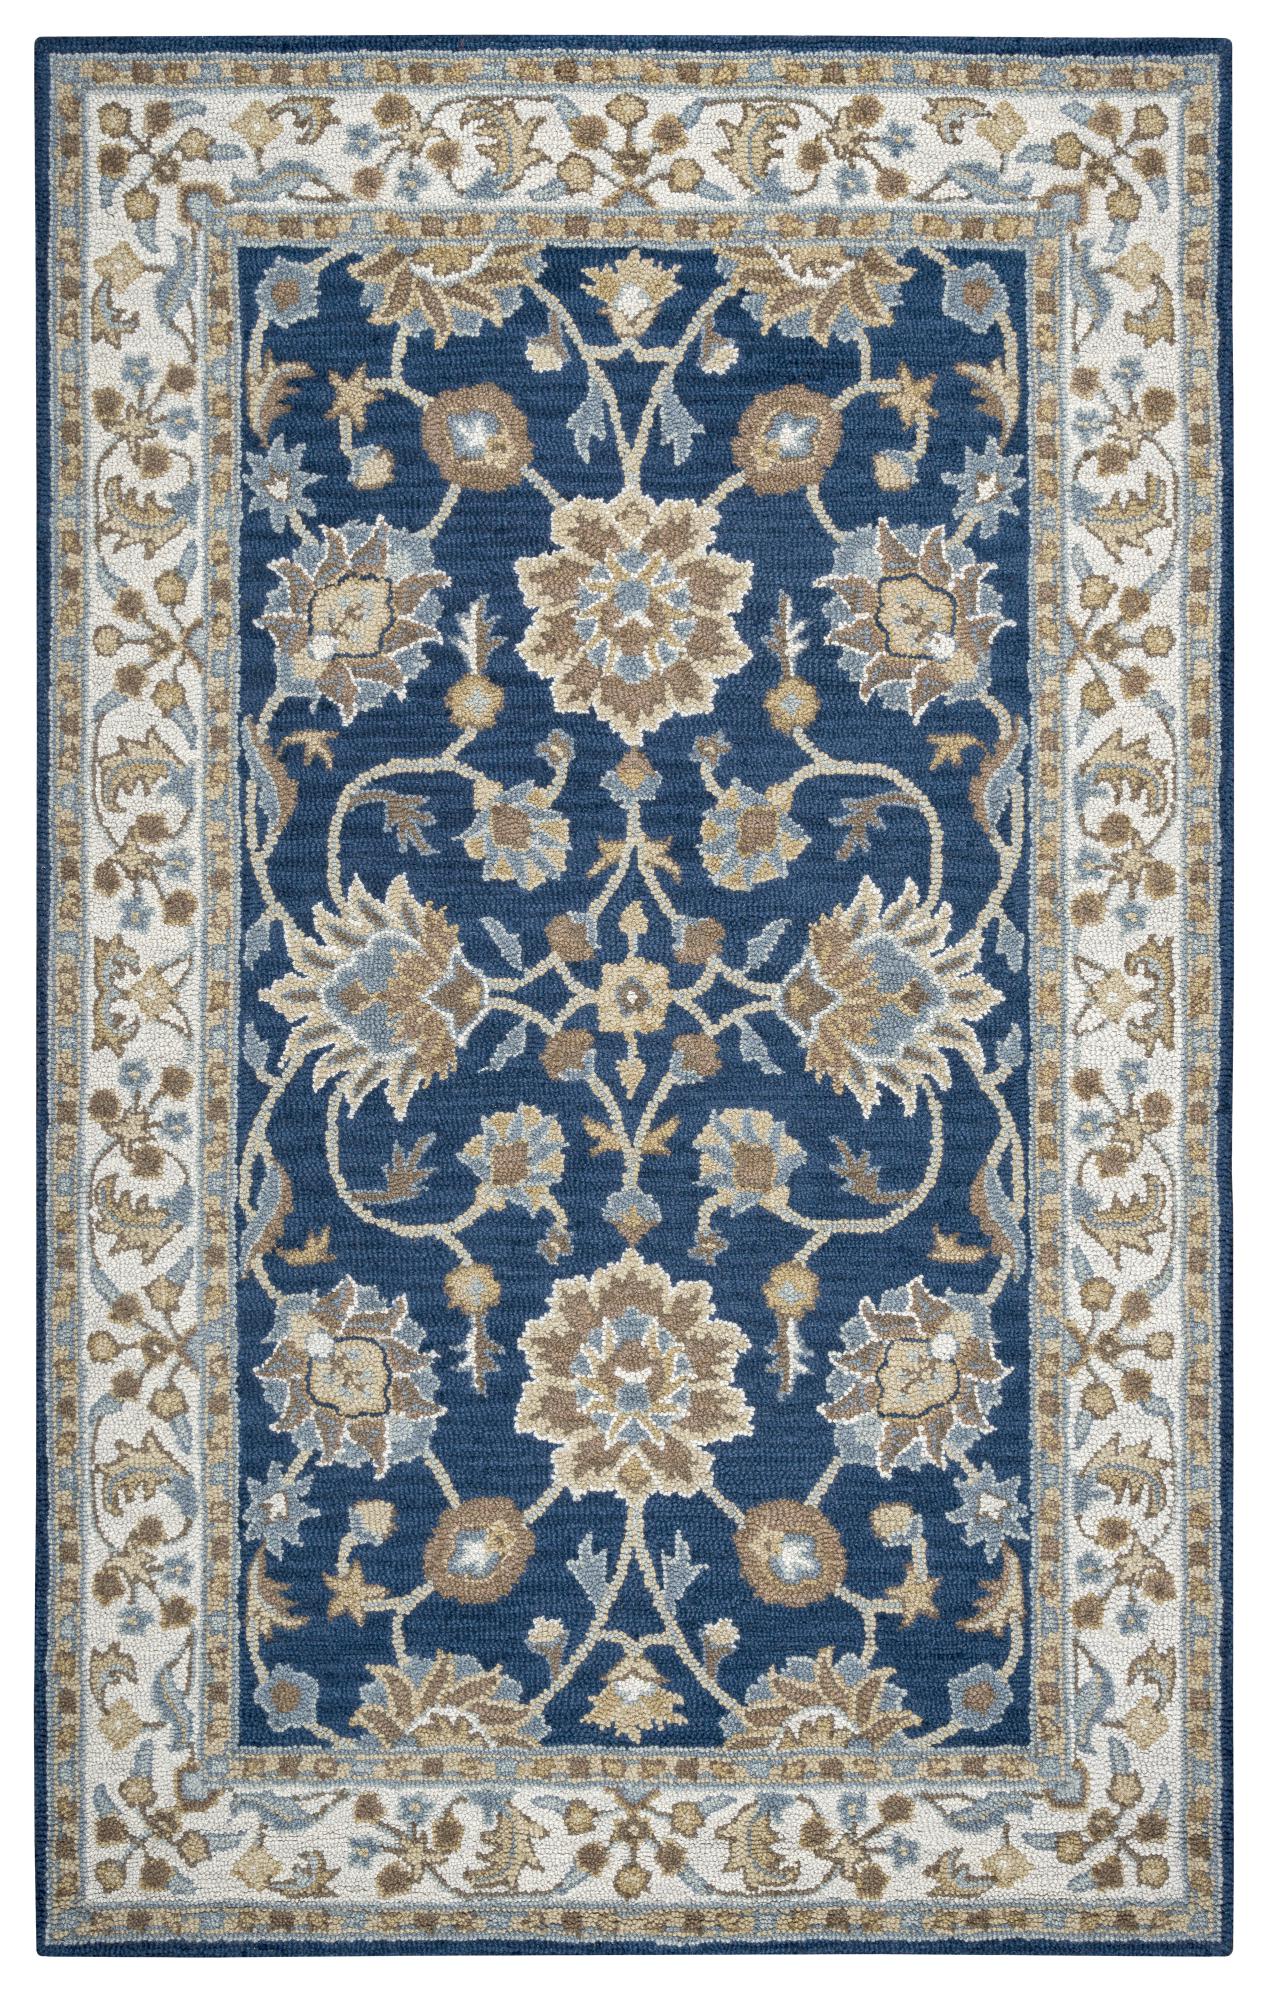 Rizzy Home AL2823 Blue 12' x 15' Hand-Tufted Area Rug - image 2 of 5